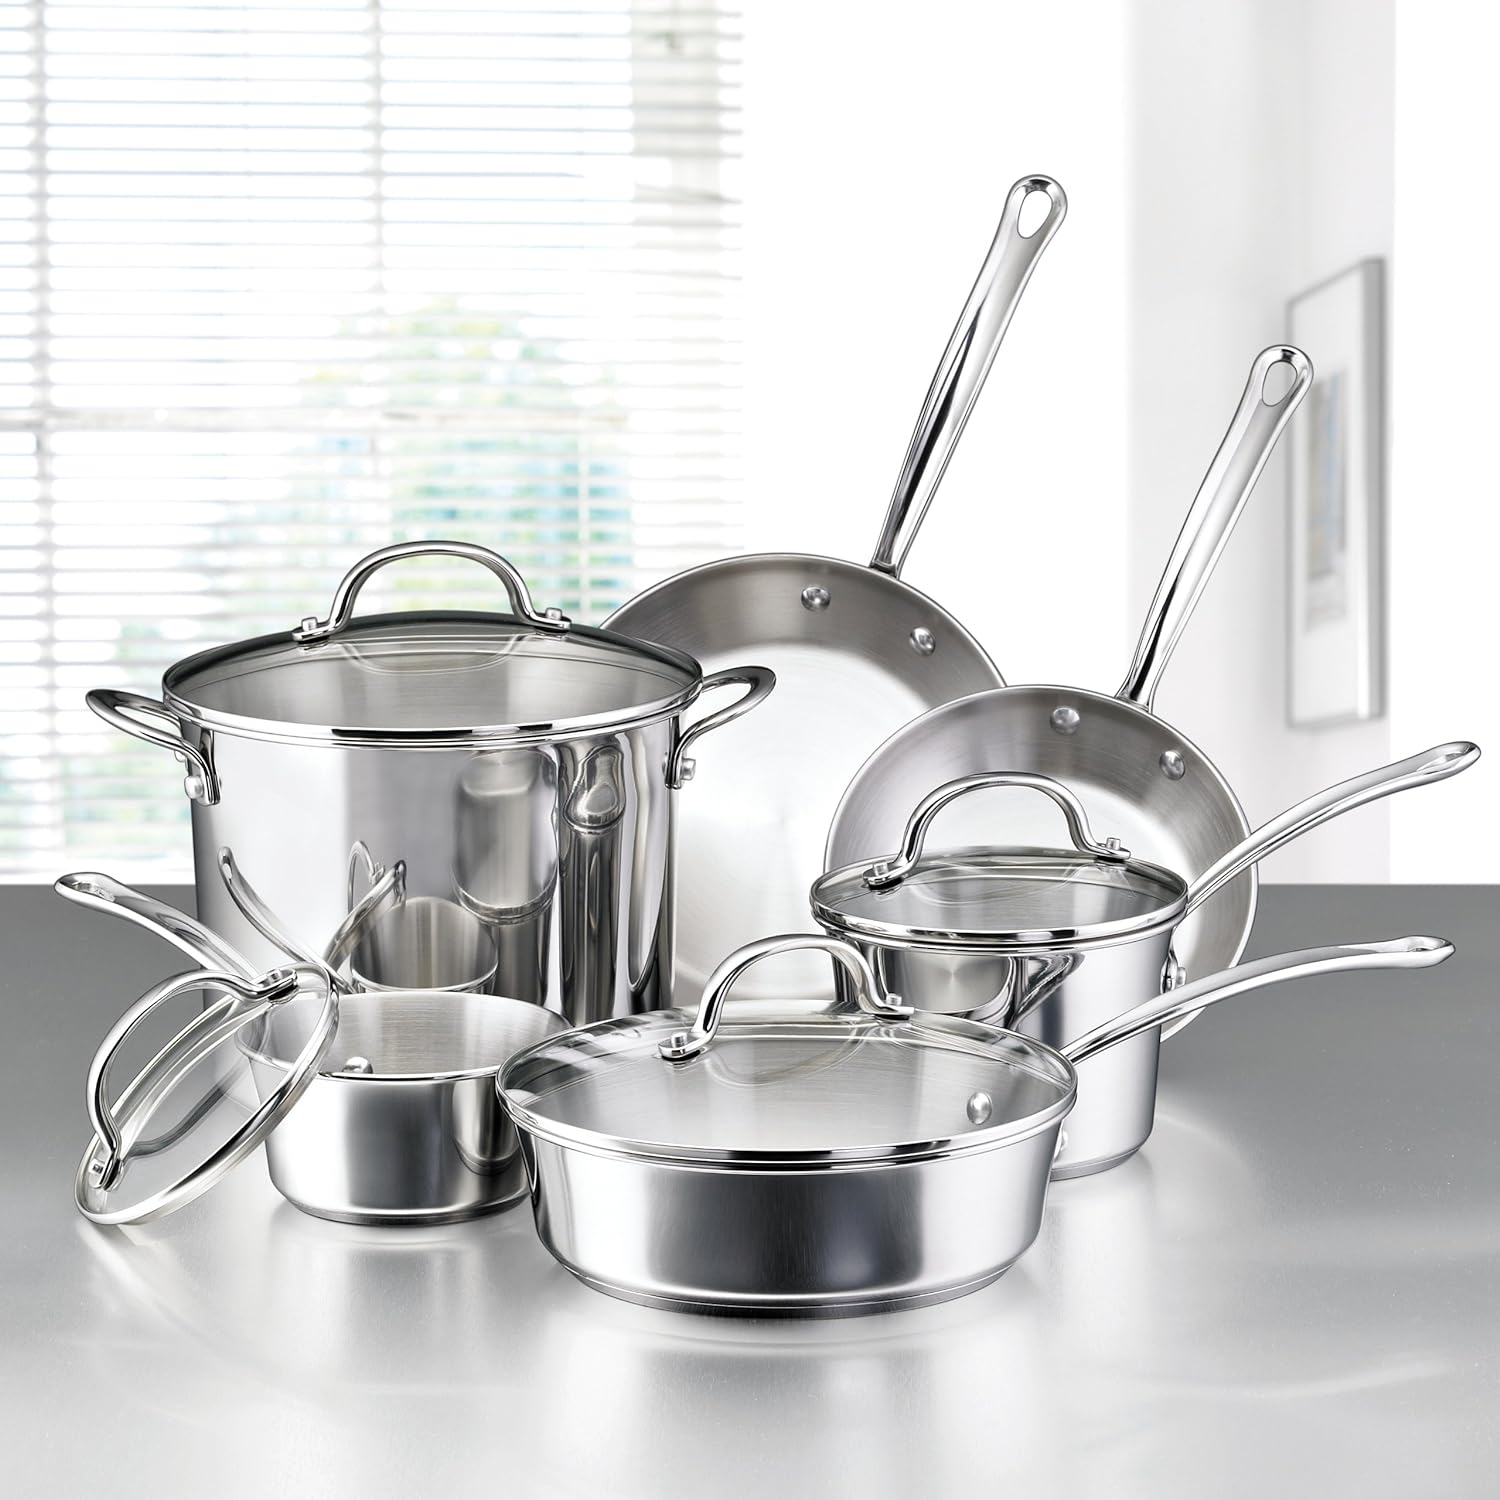 Faberware Stainless Steel 10pc Set W/Covered Saucepans Covered Saute Covered Stockpot Skillets